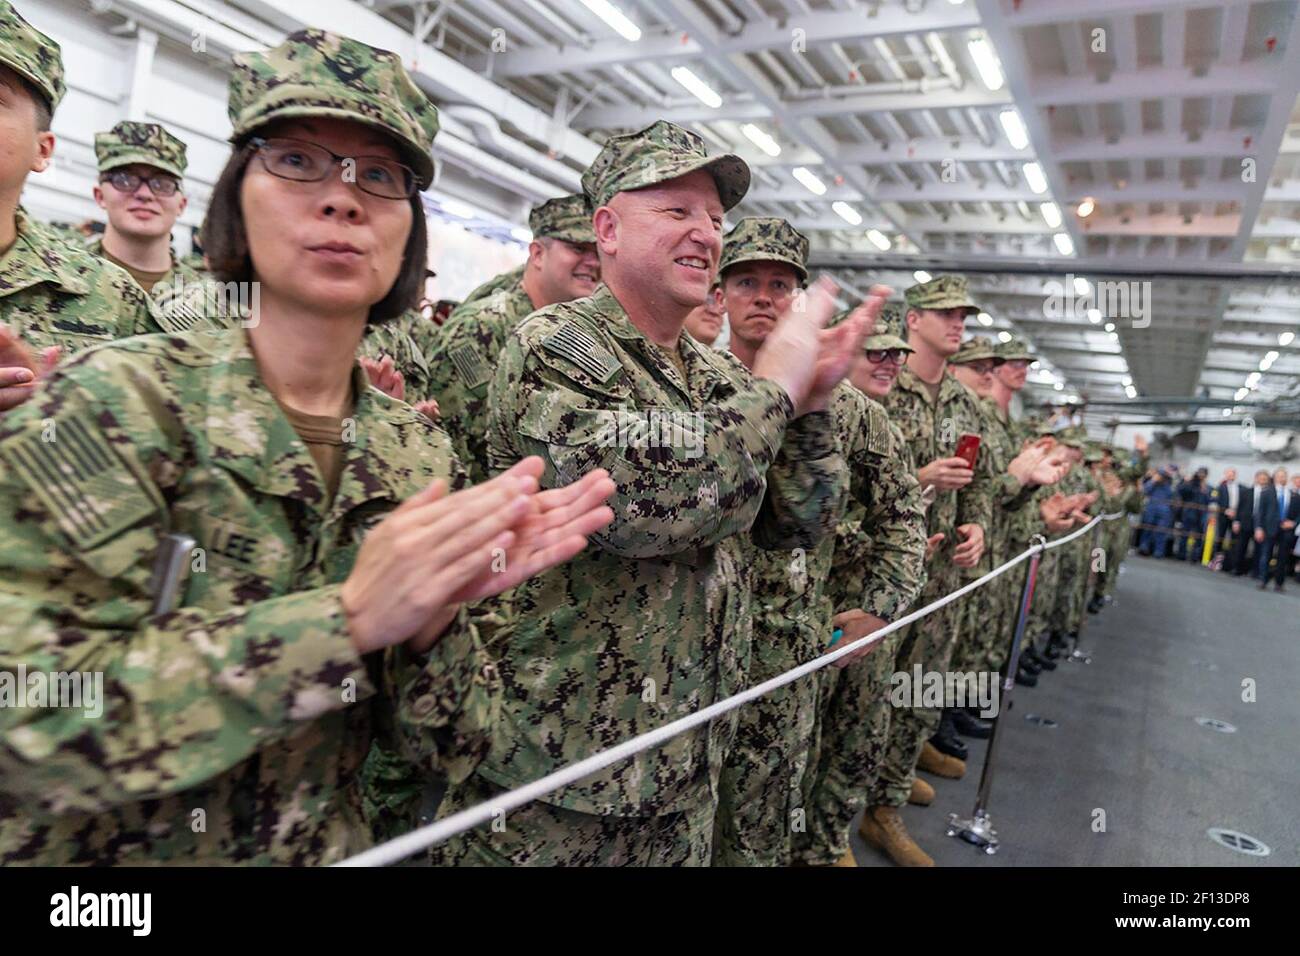 Members of the USS Wasp welcome President Donald Trump Tuesday May 28 2019 In Yokosuka Japan. Stock Photo